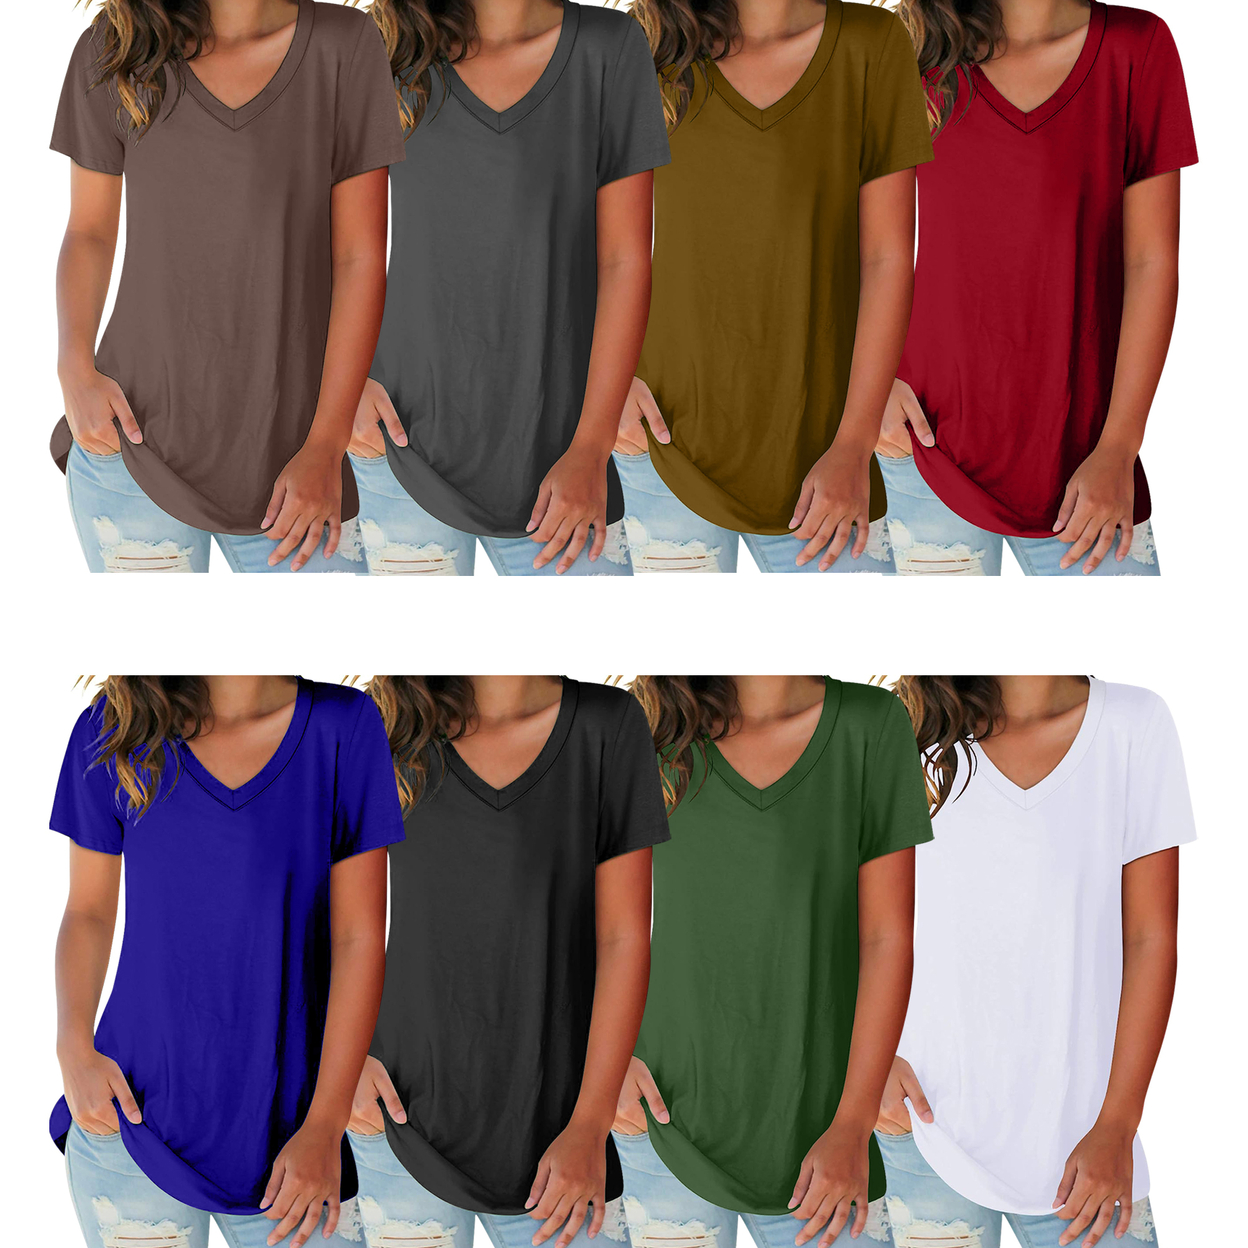 Women's Ultra-Soft Smooth Cotton Blend Basic V-Neck Short Sleeve Shirts - Red, Small